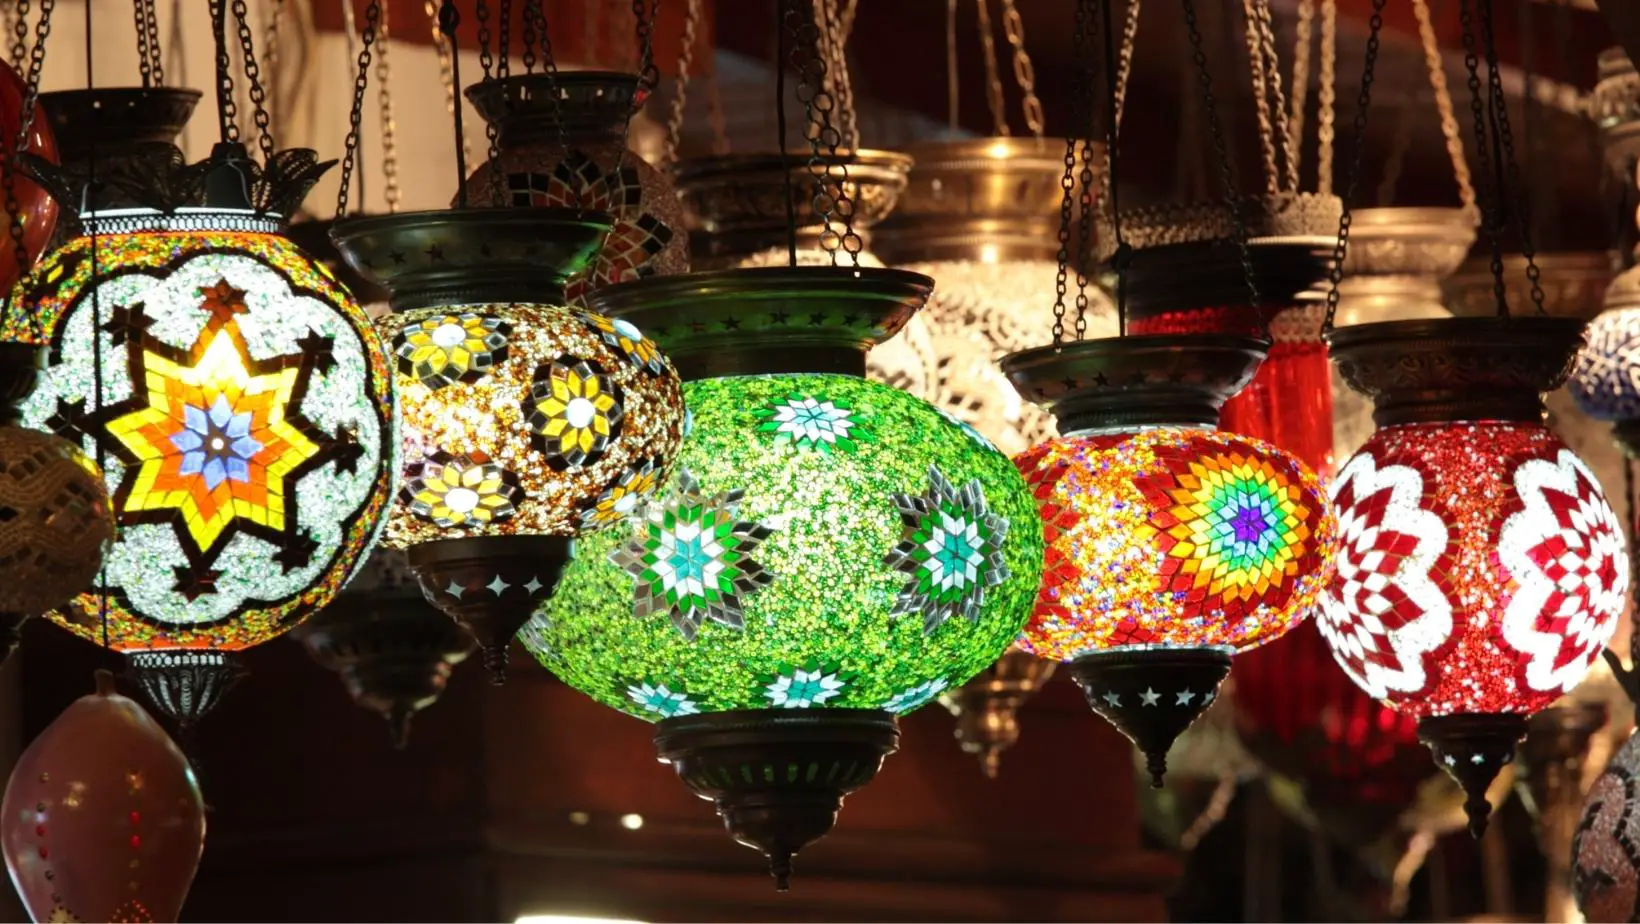 Turkish Souvenirs - what to buy in Istanbul